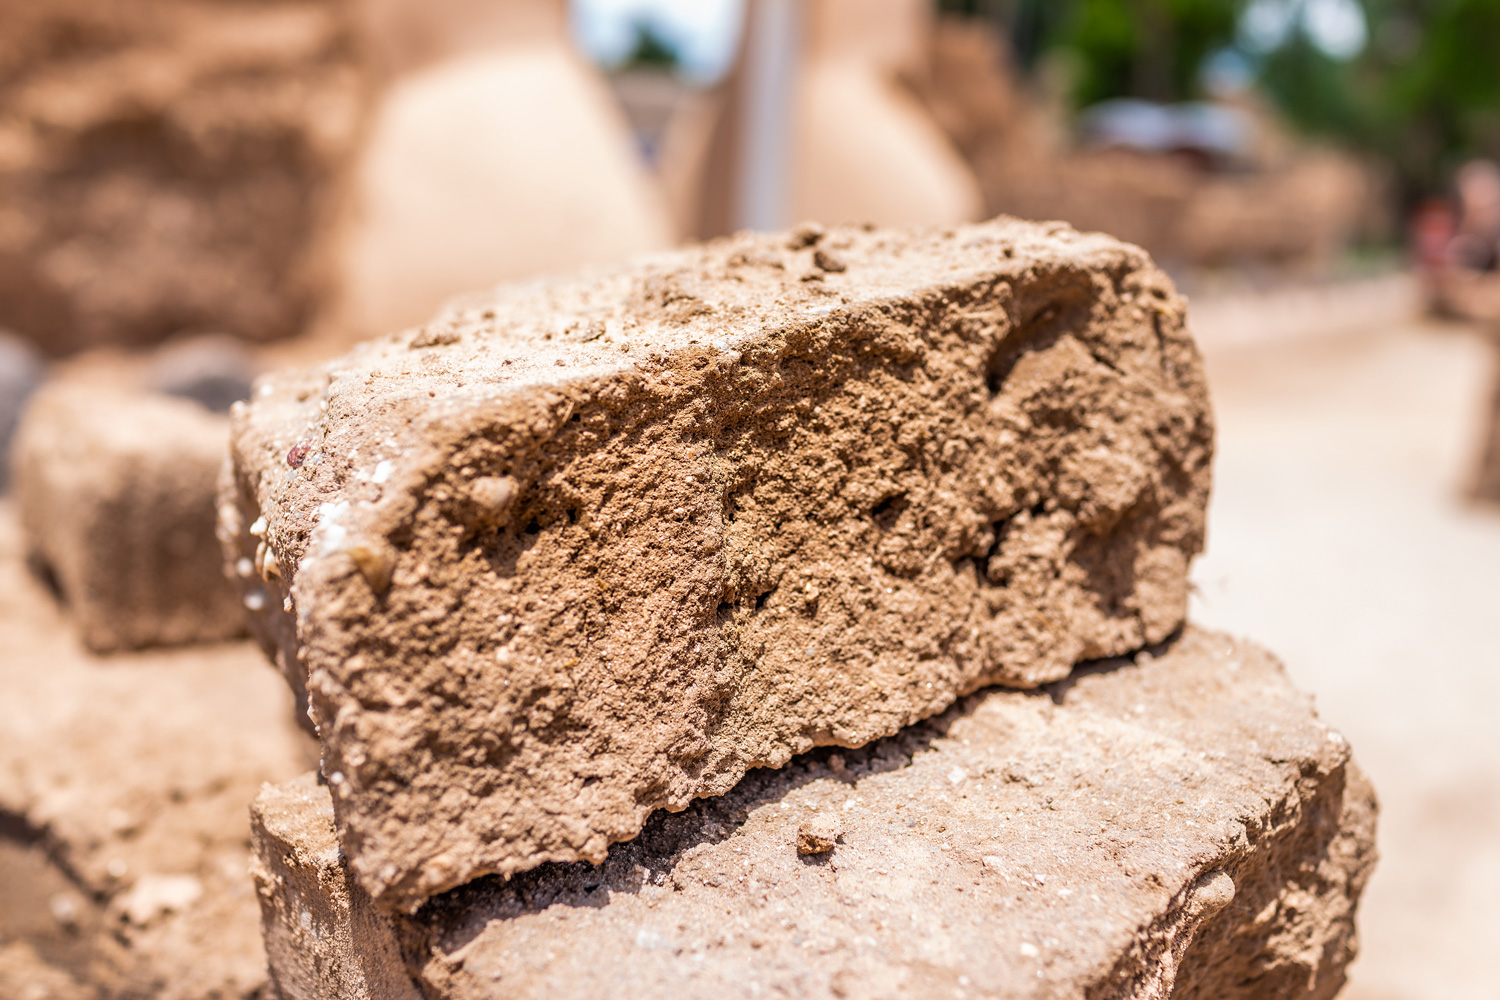 Closeup of adobe mud sun dried brick showing detail and texture during construction